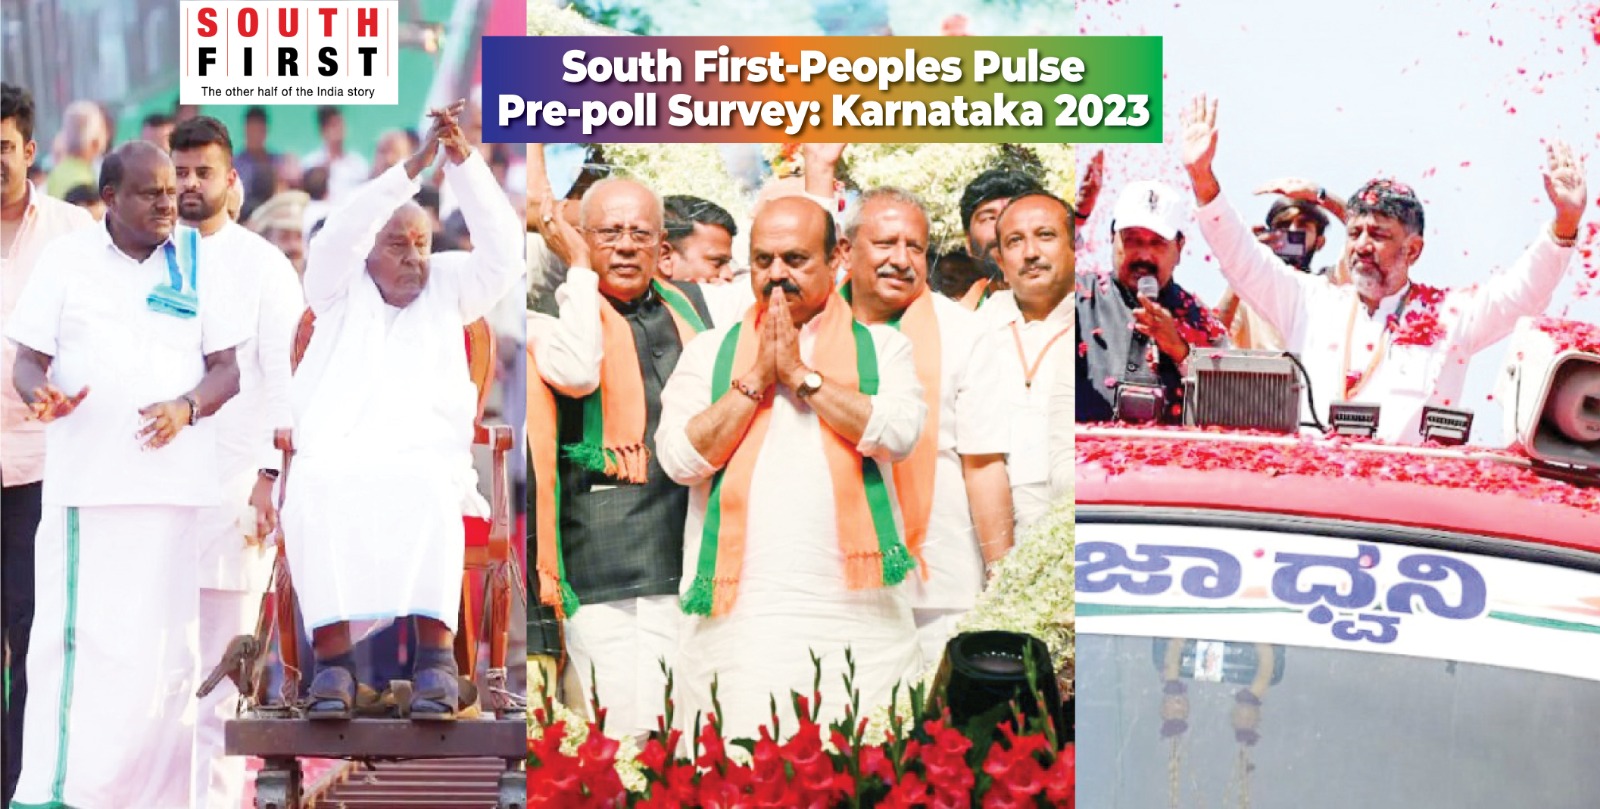 South First pre-poll survey Karnataka 2023: Who is voting for which party and why